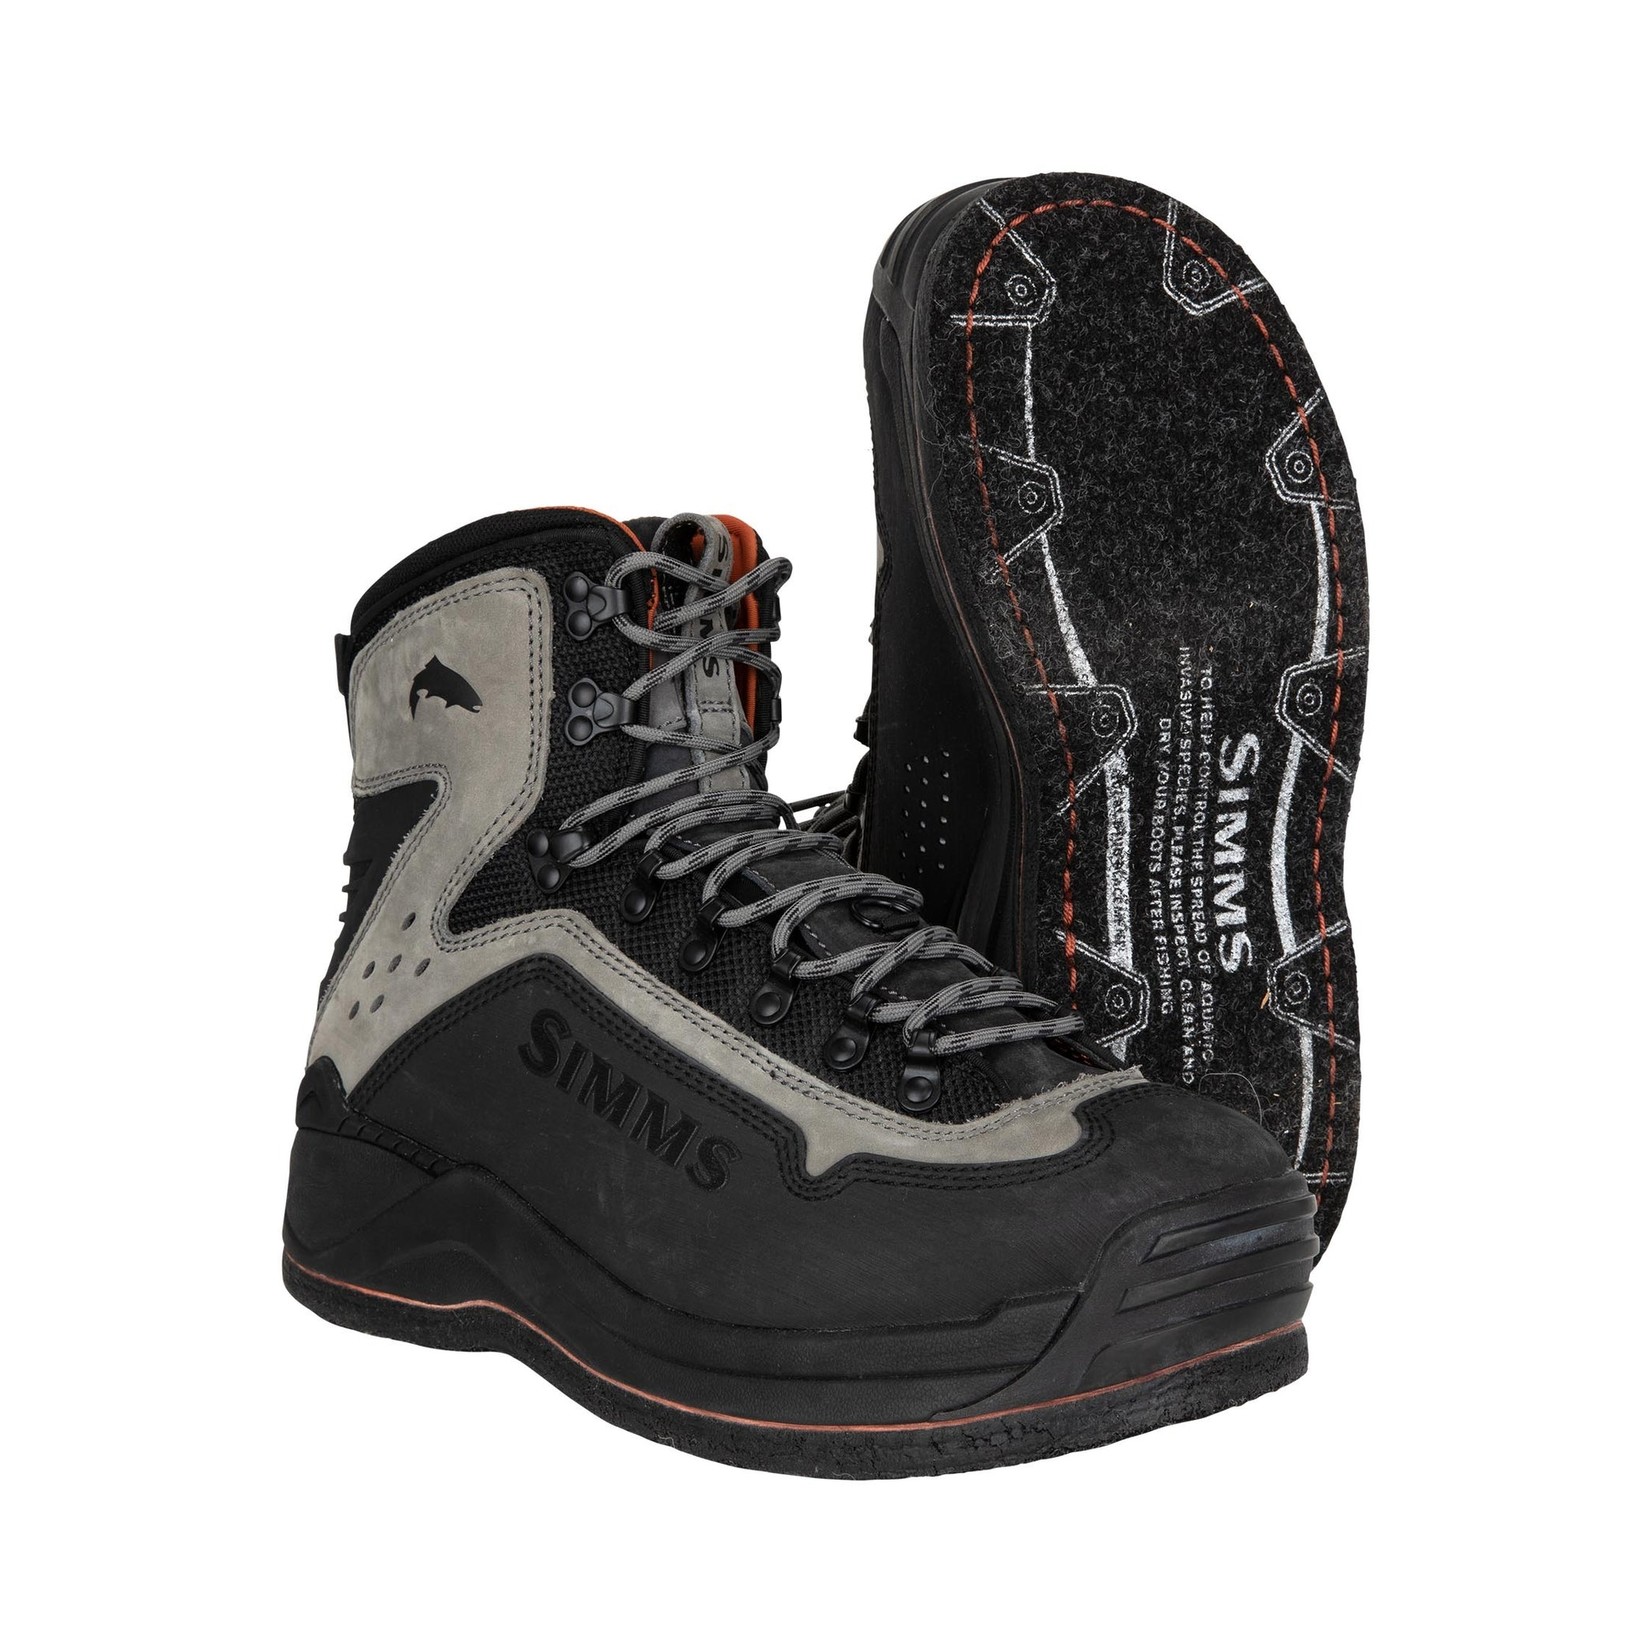 Simms Fishing M's G3 Guide Wading Boots - Felt Soles